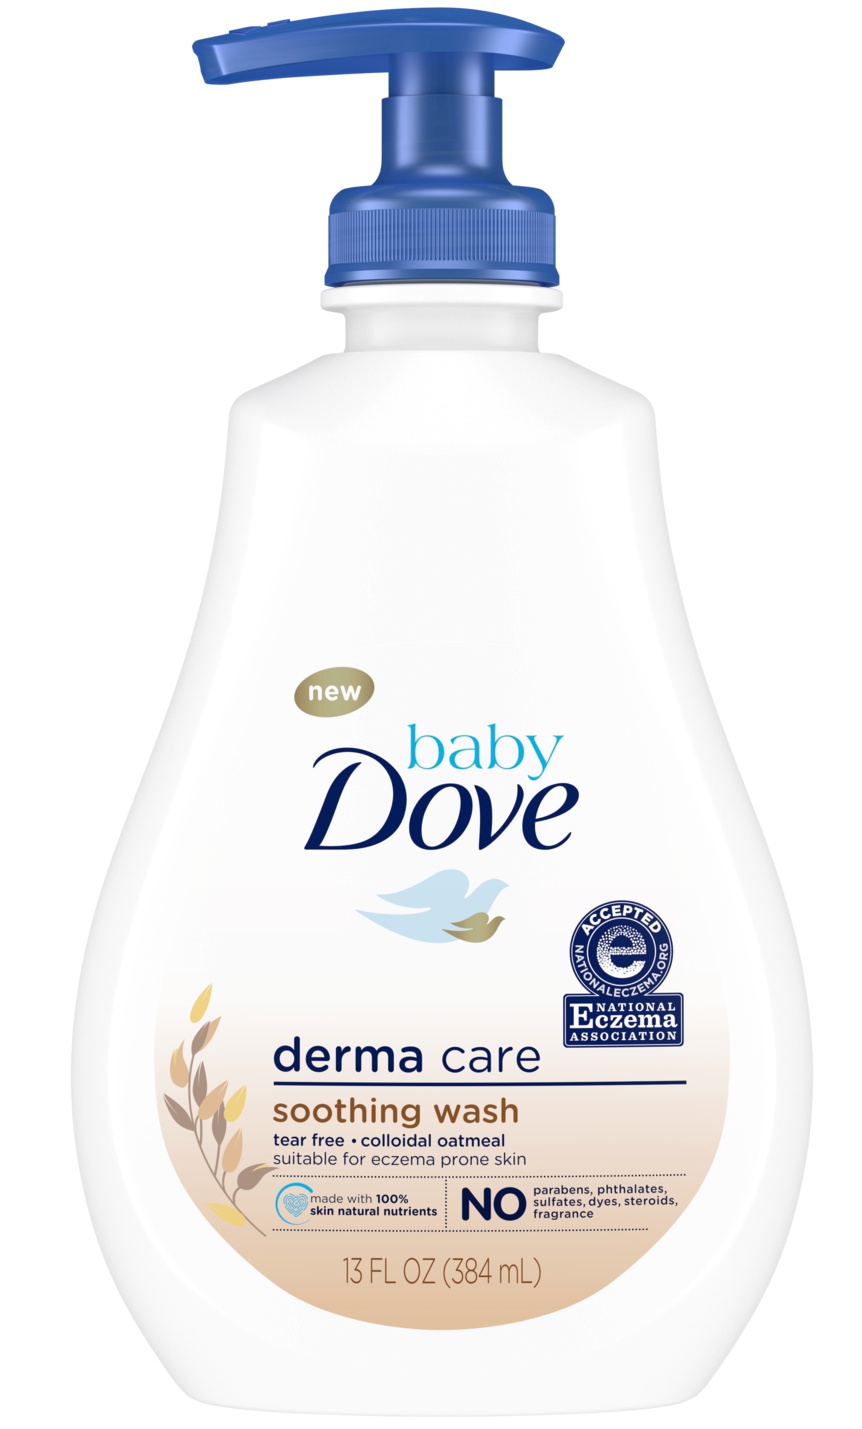 Baby Dove Derma Care Soothing Wash